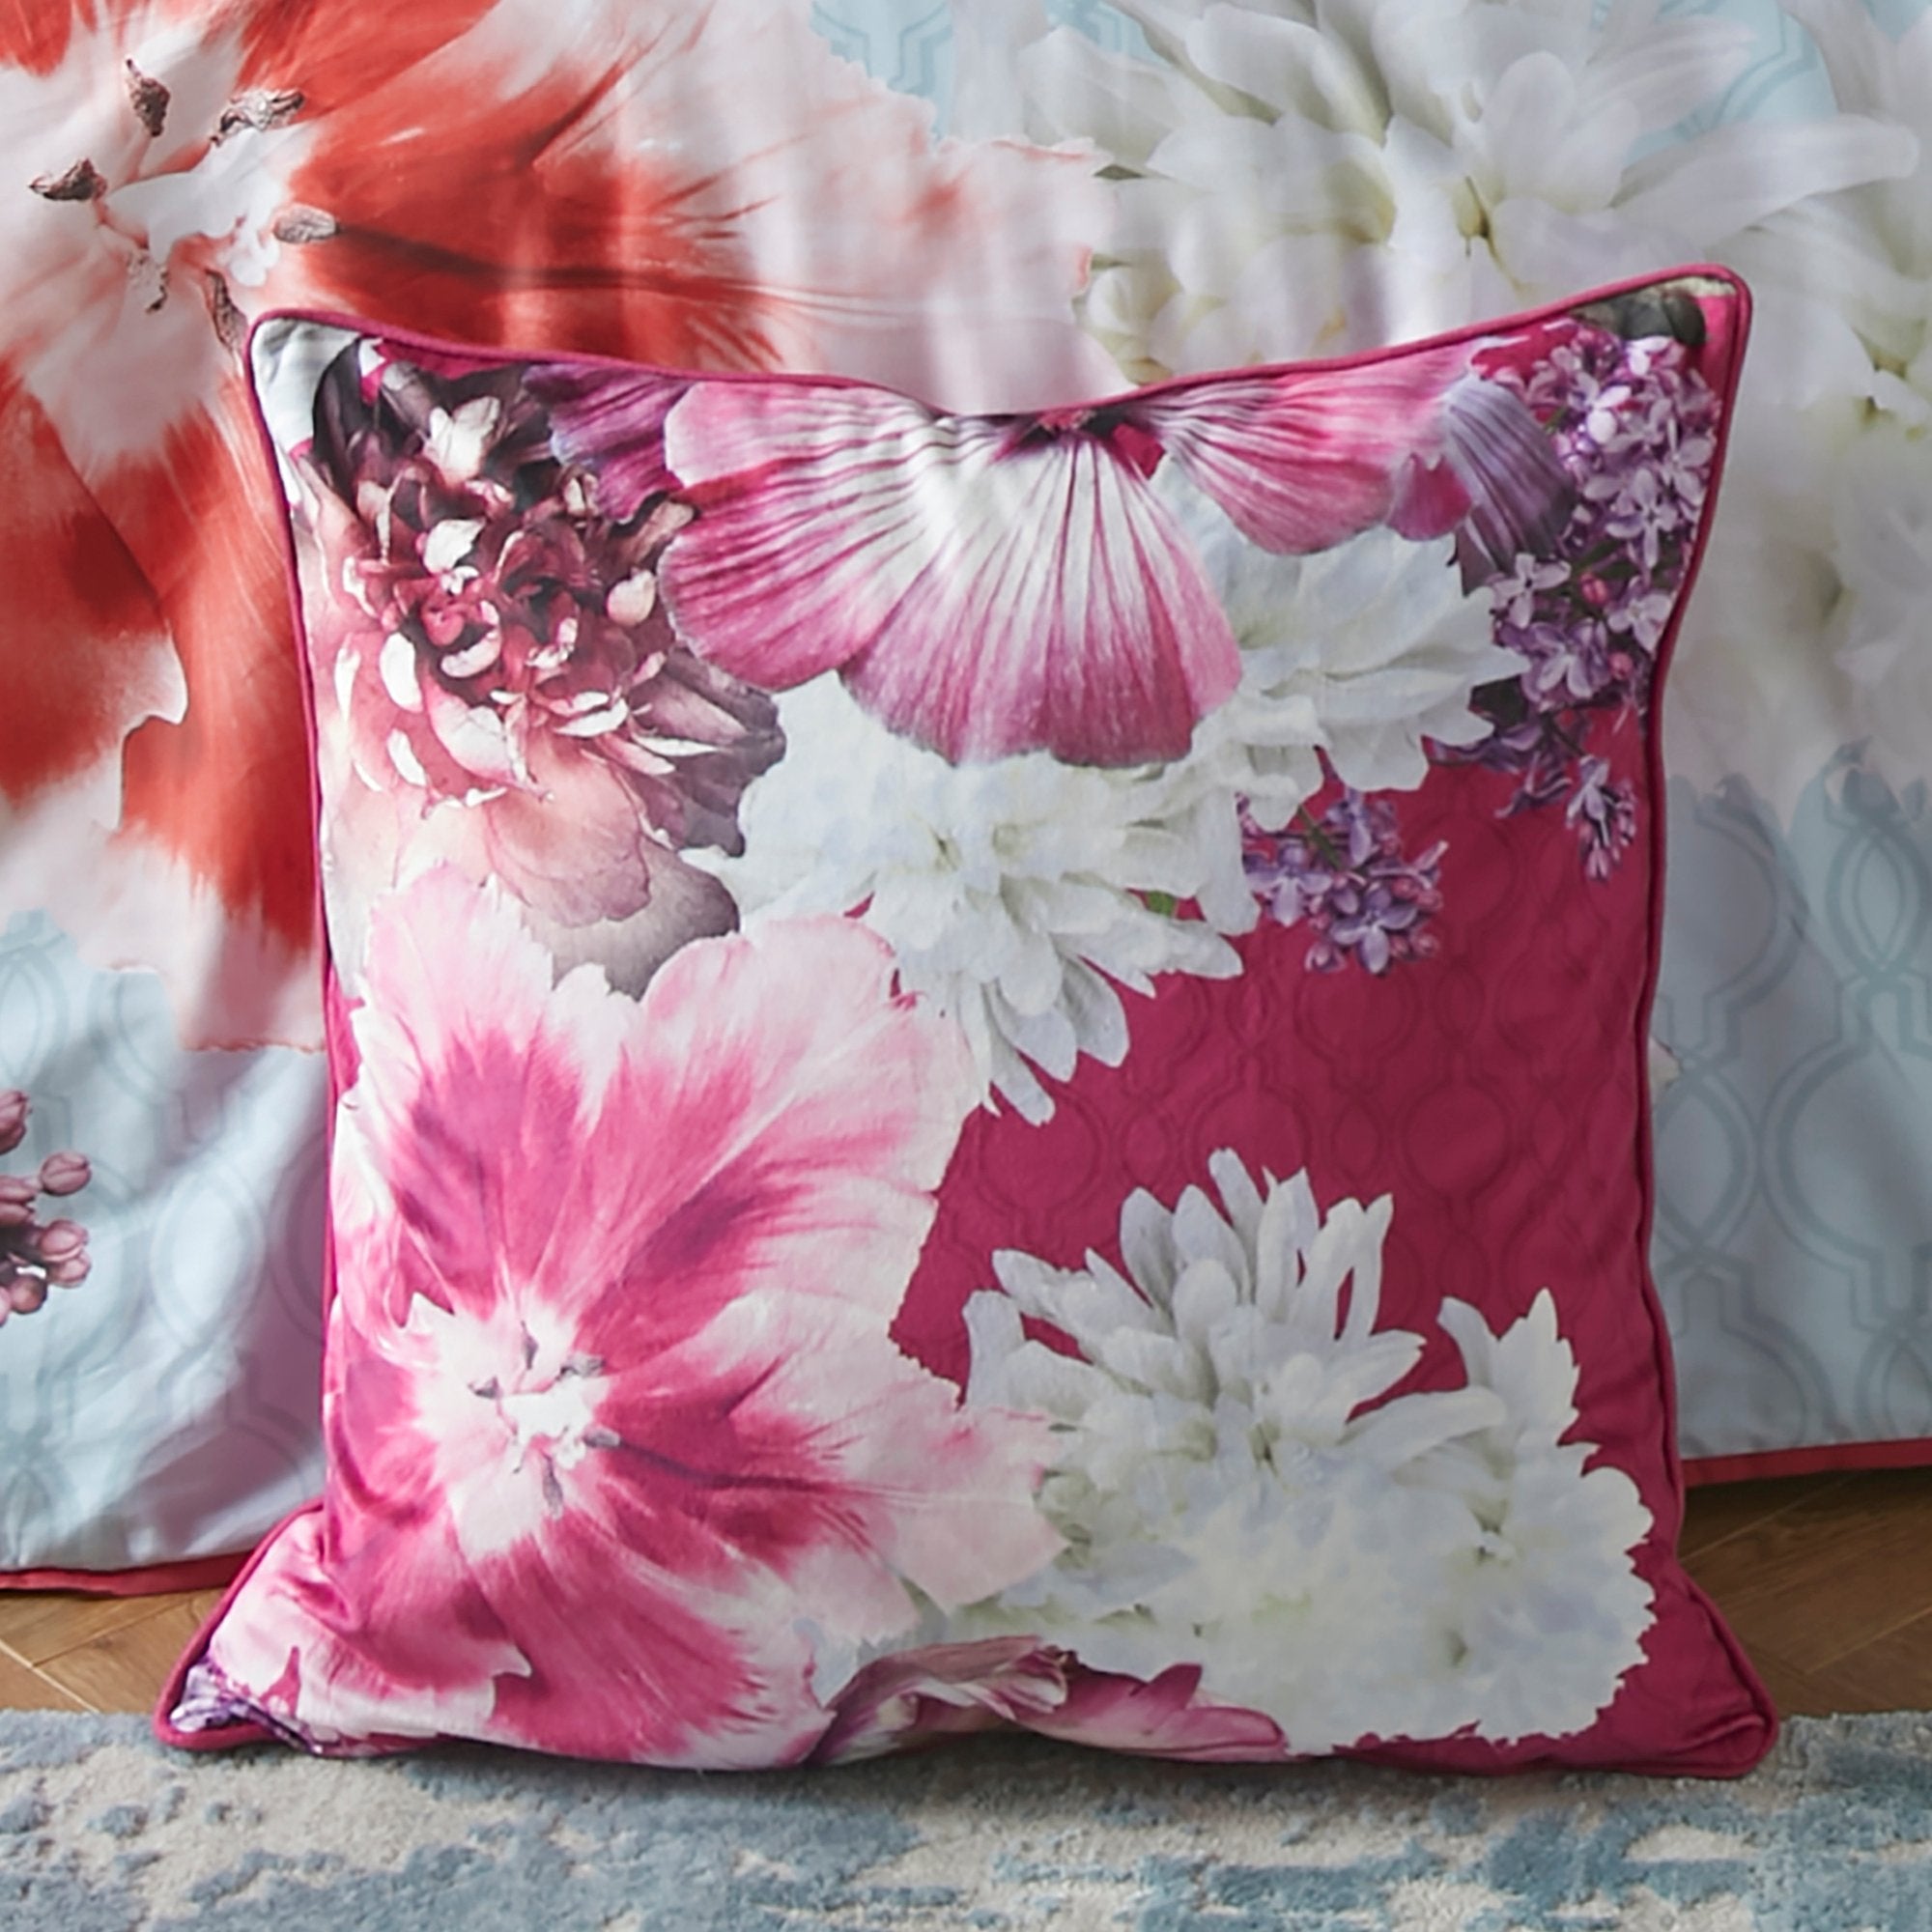 Cushion Mayfair Lady by Laurence Llewelyn-Bowen in Pink